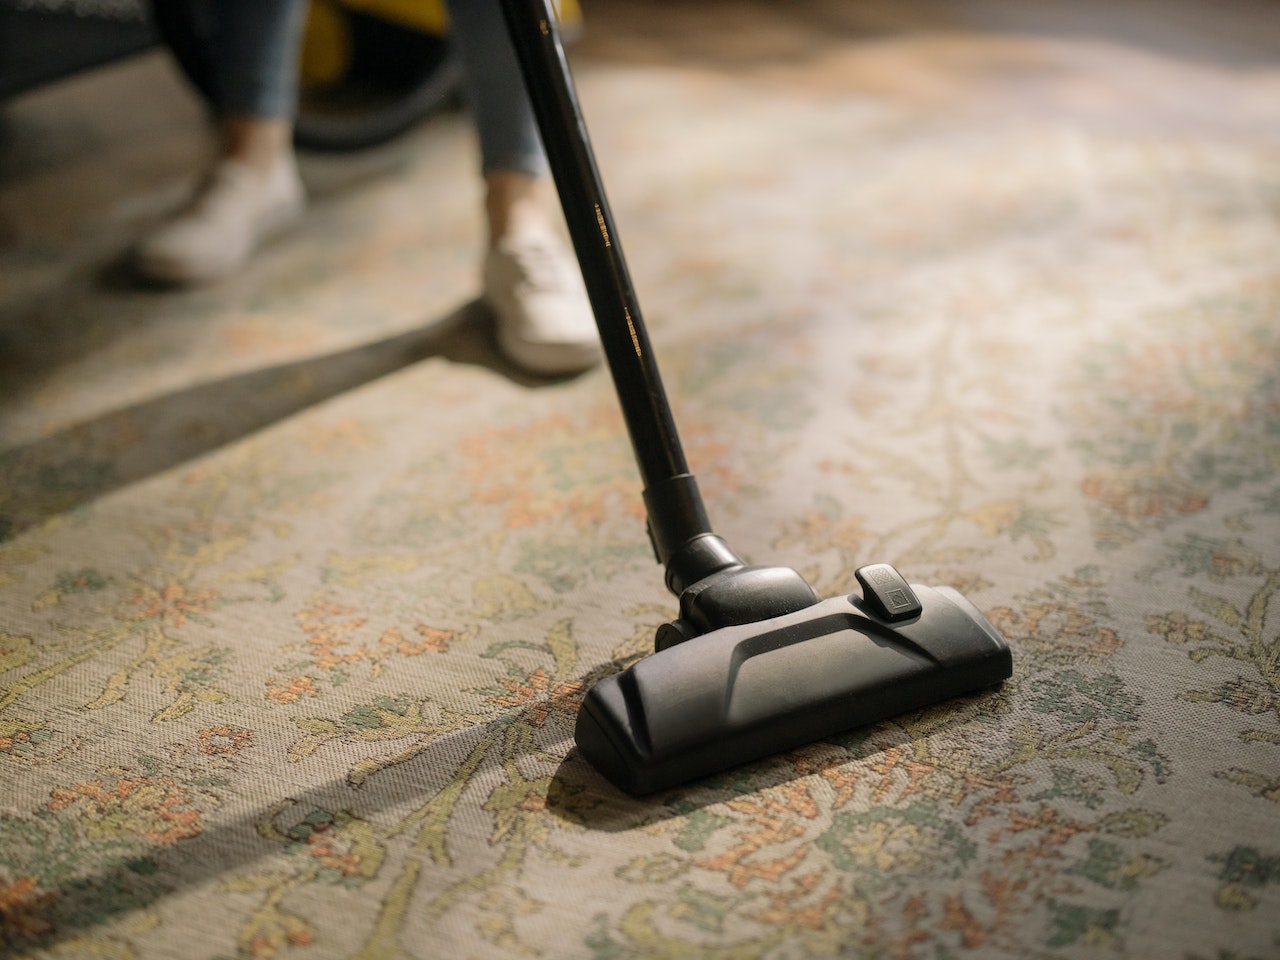 Vacuum is cleaning a rug